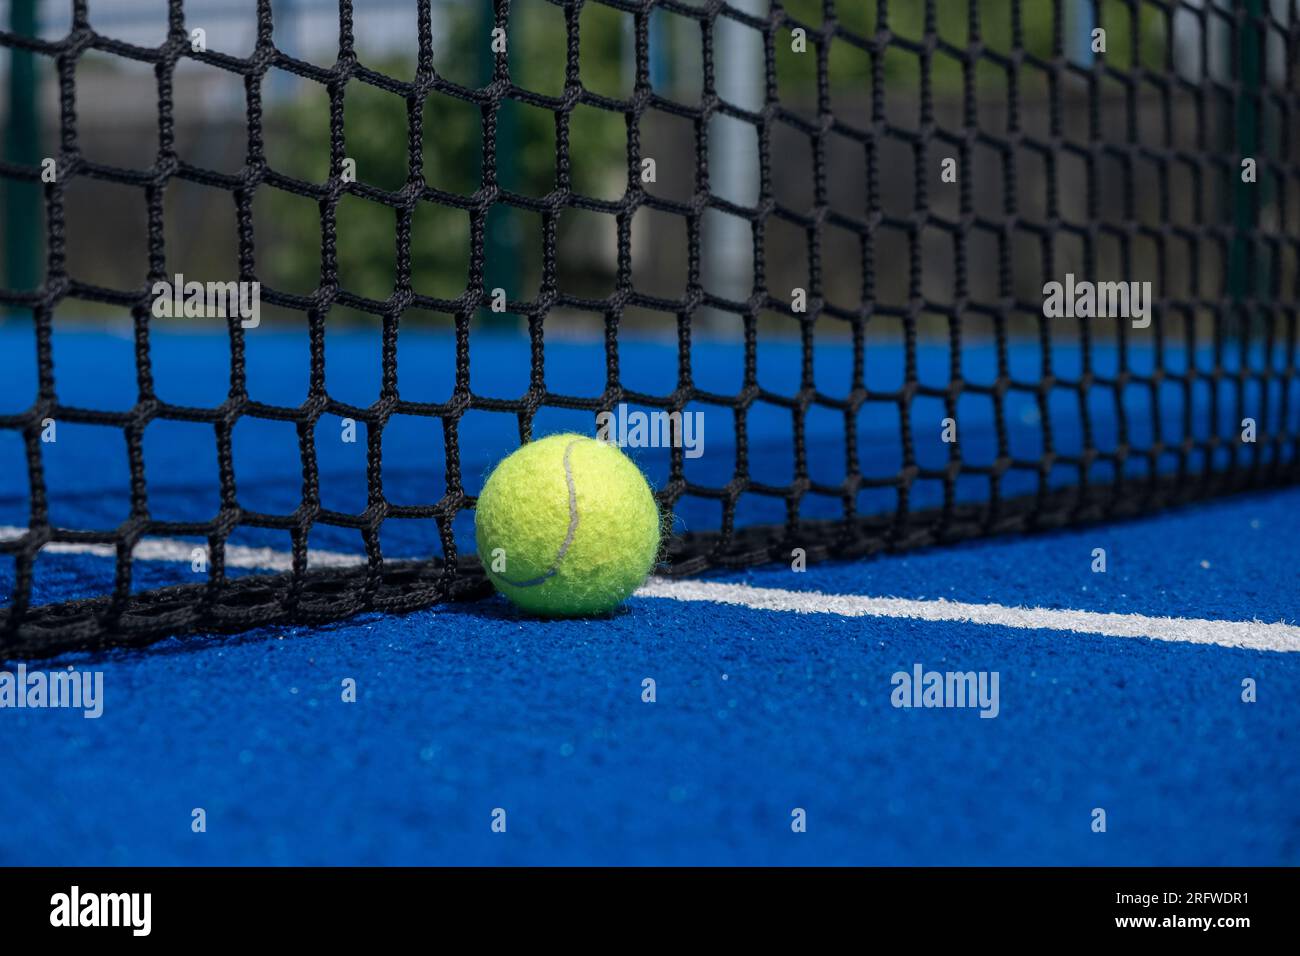 Yellow ball on floor behind paddle net in blue court outdoors. Padel tennis Stock Photo